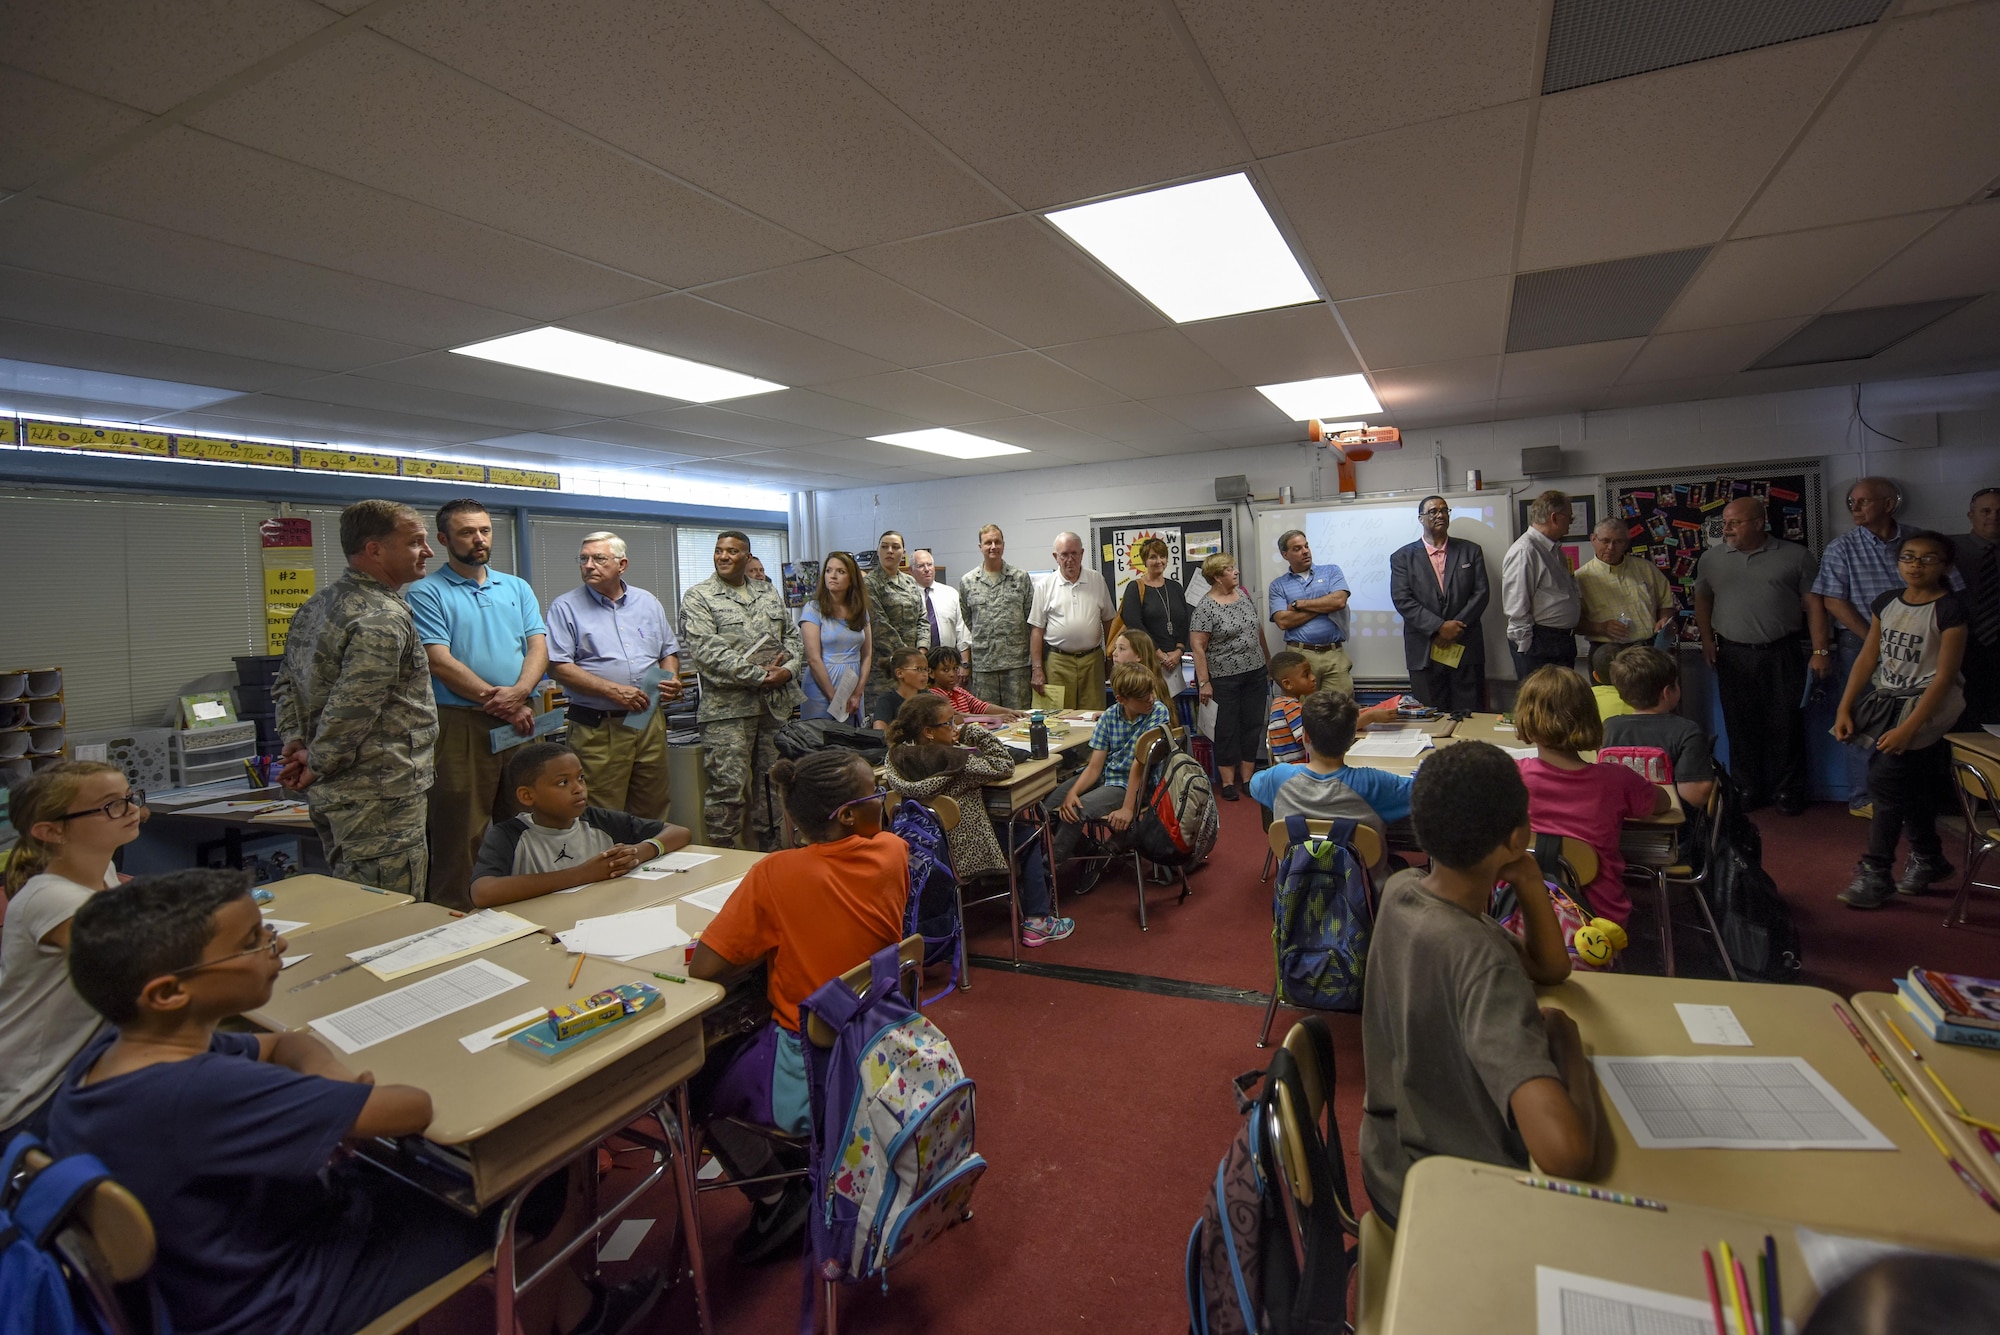 Several 4th Fighter Wing and civic leaders tour a classroom at Meadow Lane Elementary, May 11, 2016, in Goldsboro, North Carolina. More than 20 leaders toured the elementary school along with Spring Creek Middle School and Eastern Wayne High School as part of the Make It Better Children’s Education initiative. (U.S. Air Force photo by Airman Shawna L. Keyes)